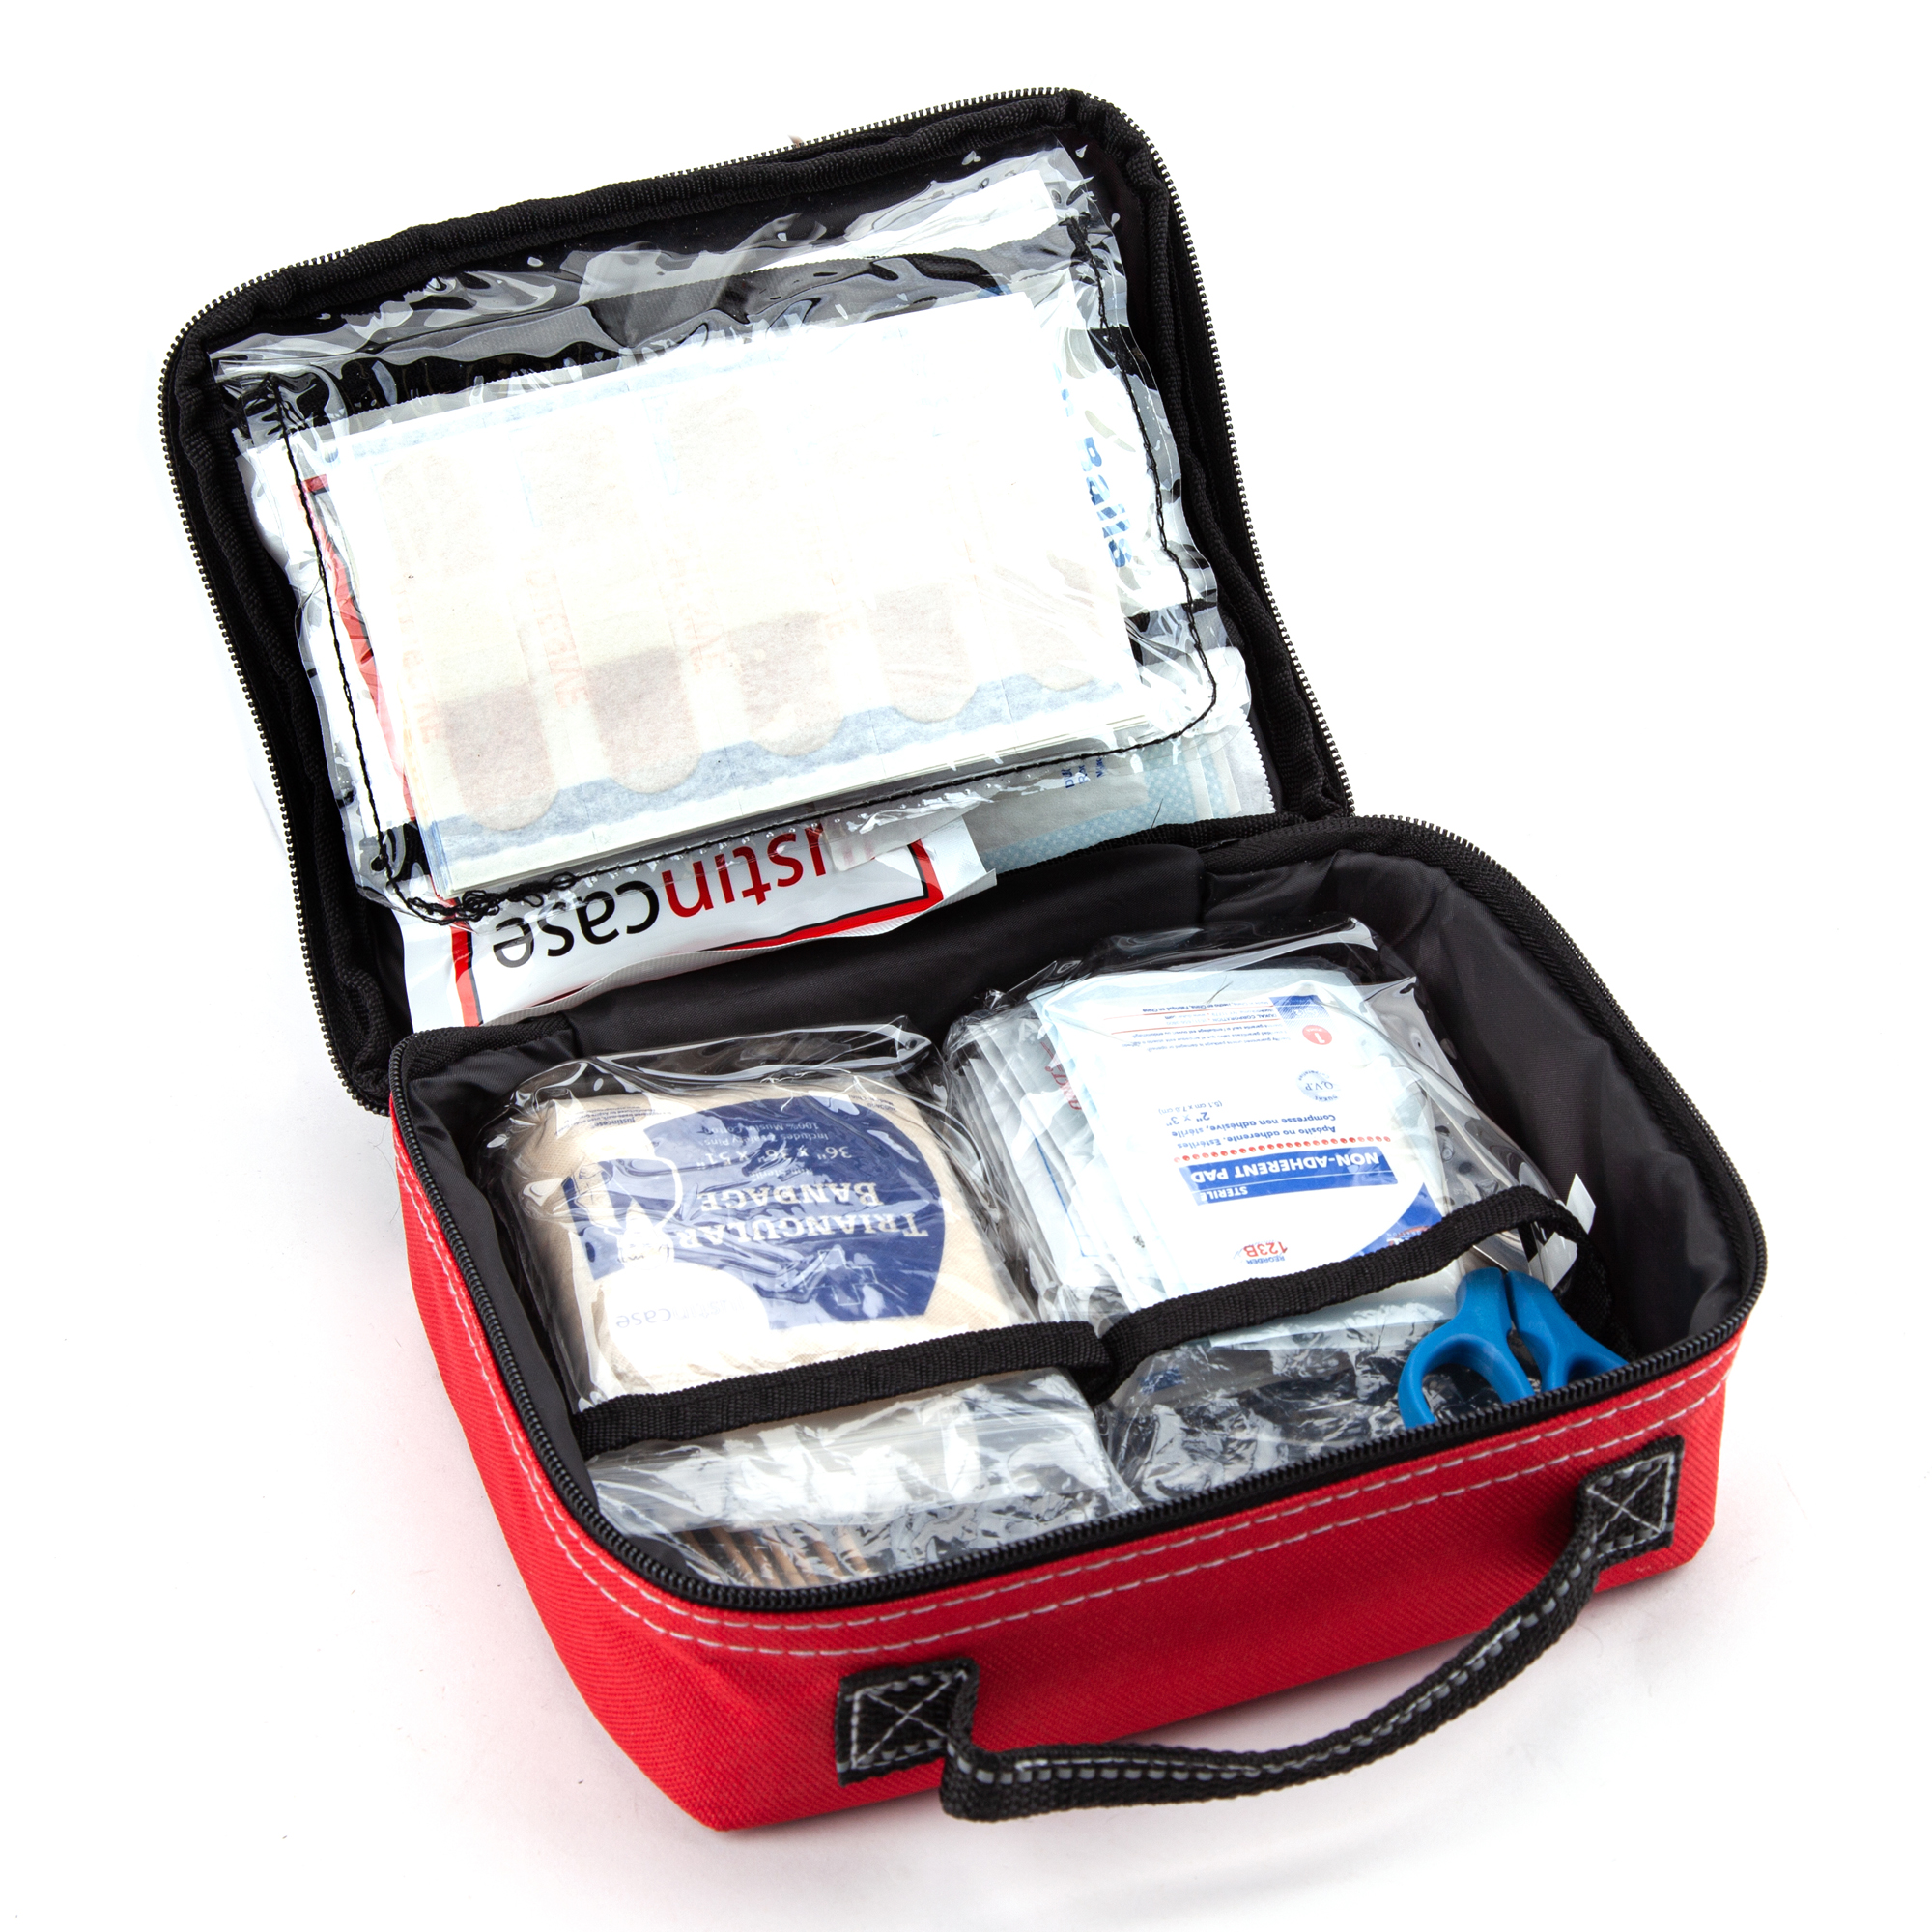 Justin Case Family First Aid Kit - image 3 of 5